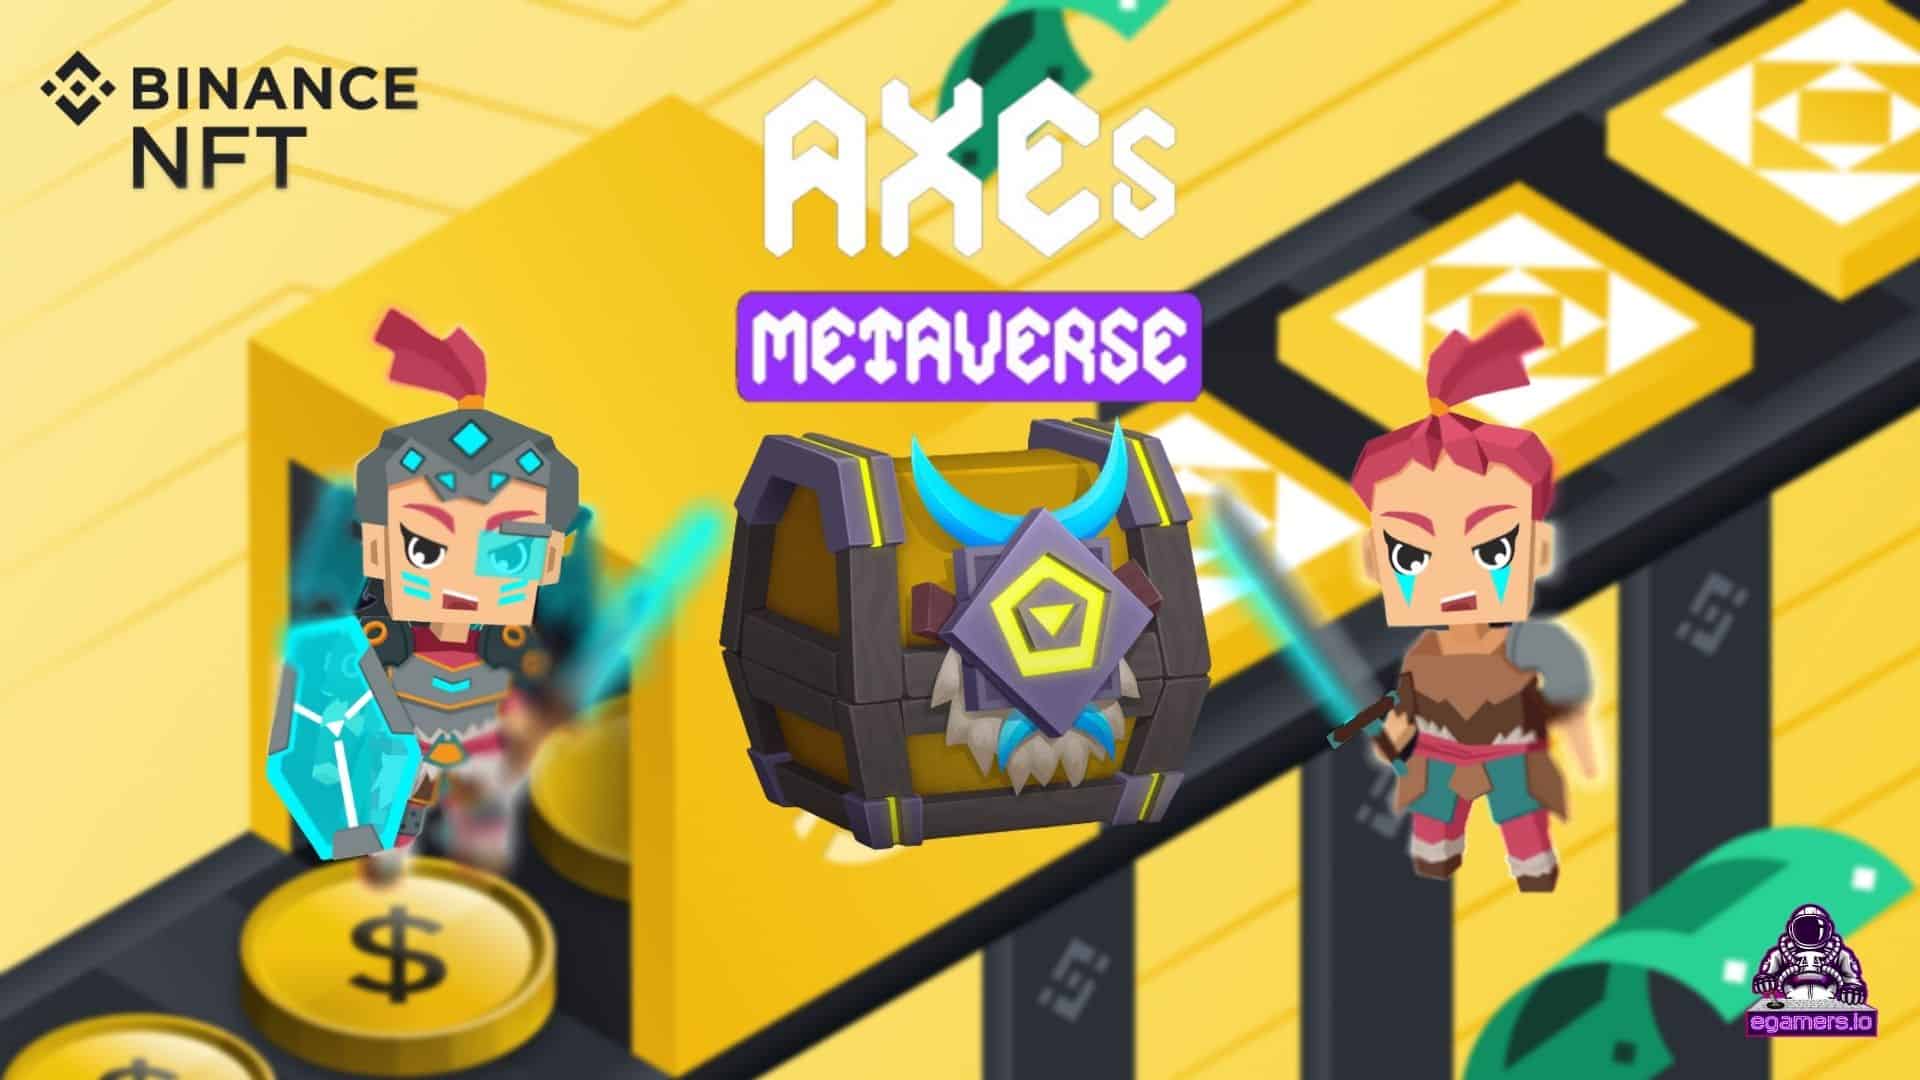 Axes Metaverse to Host a Binance Chest Sale & GAO #3